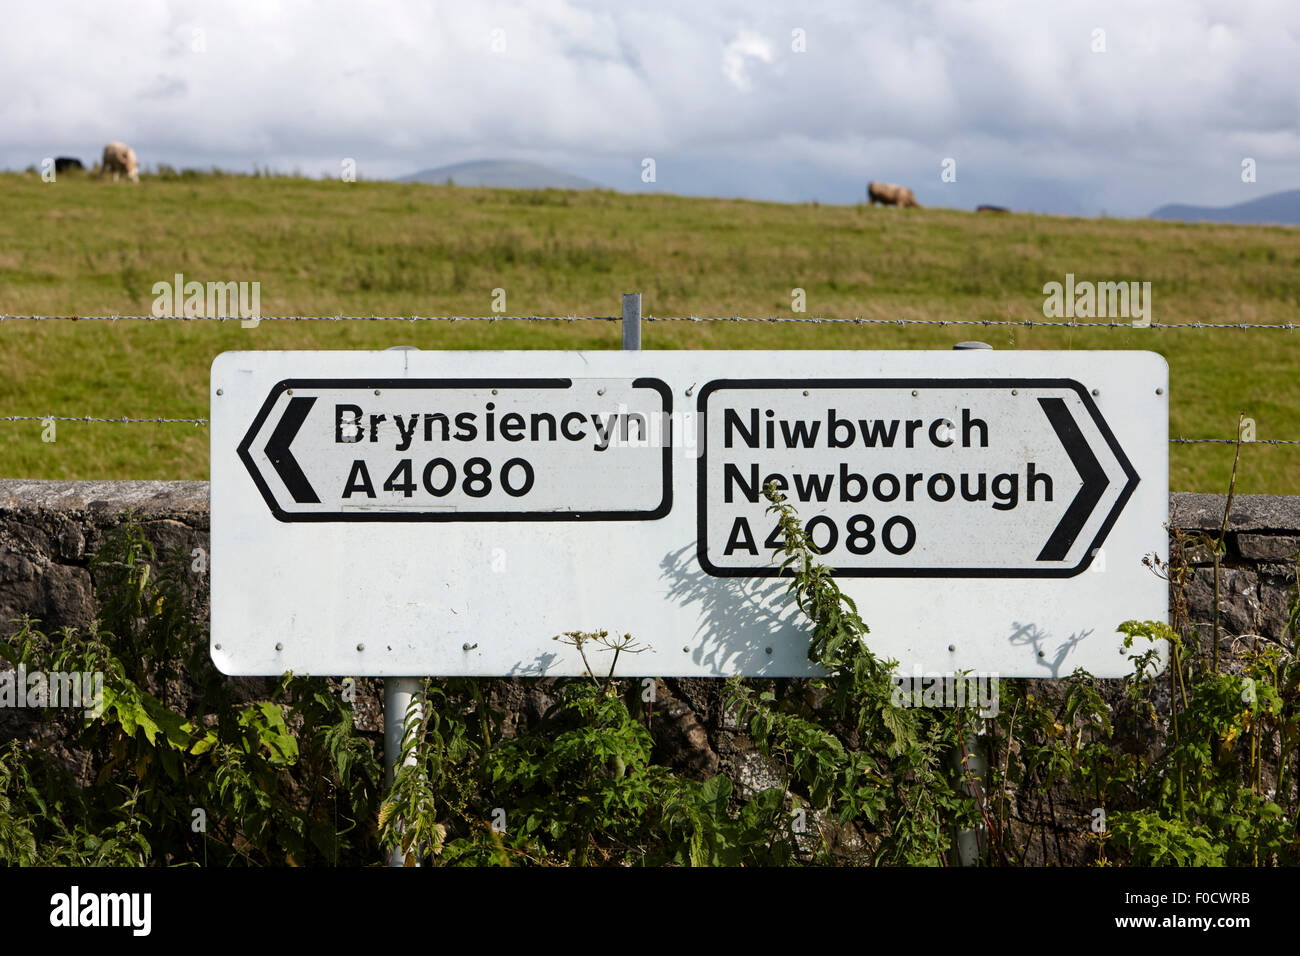 roadsign for the a4080 rural road in anglesey north wales between brynsiencyn and newborough Stock Photo